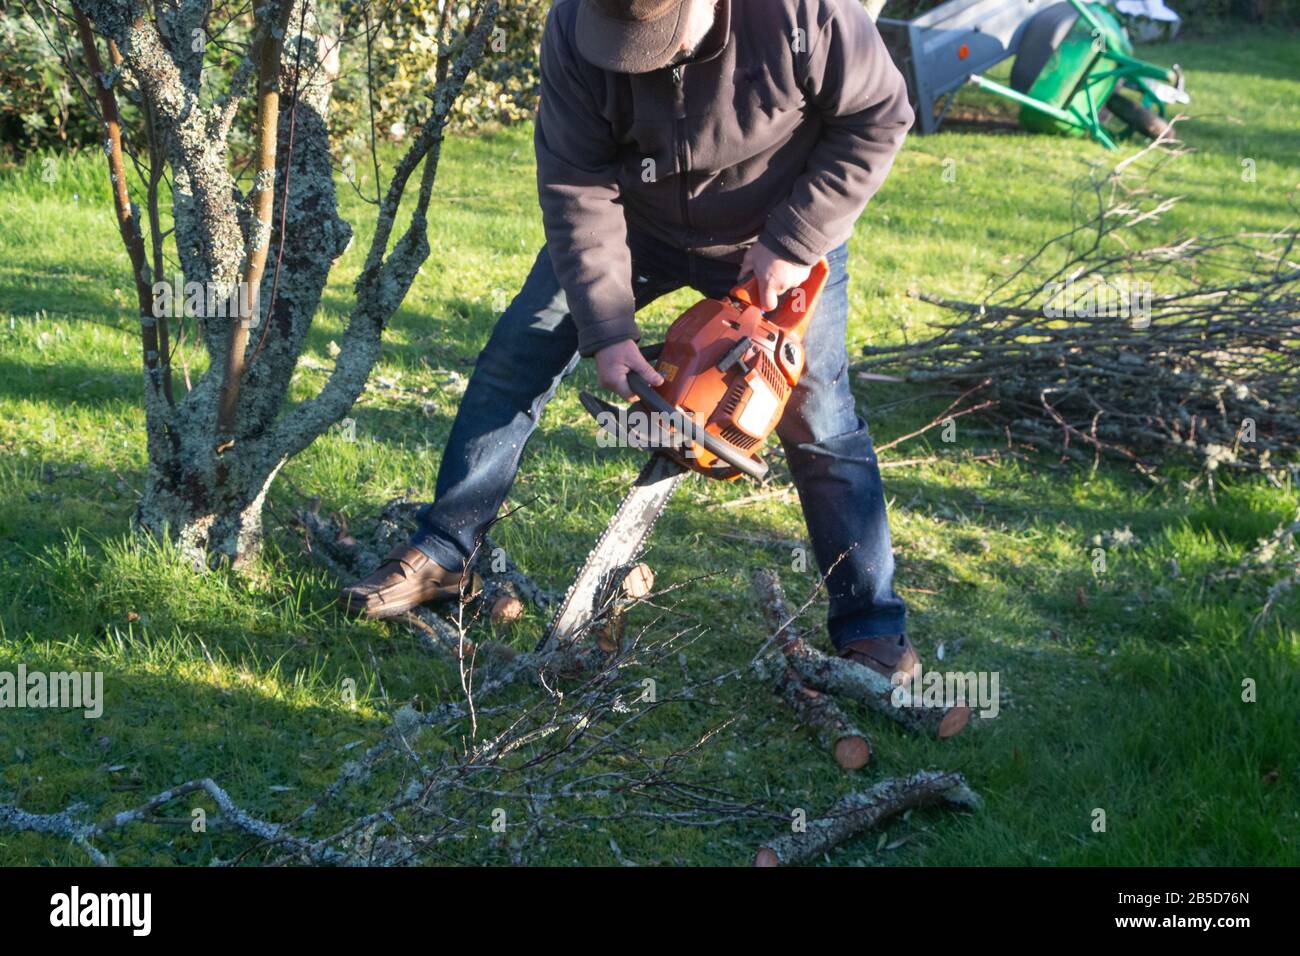 Lumberjack cutting branch on the ground with a chain saw Stock Photo